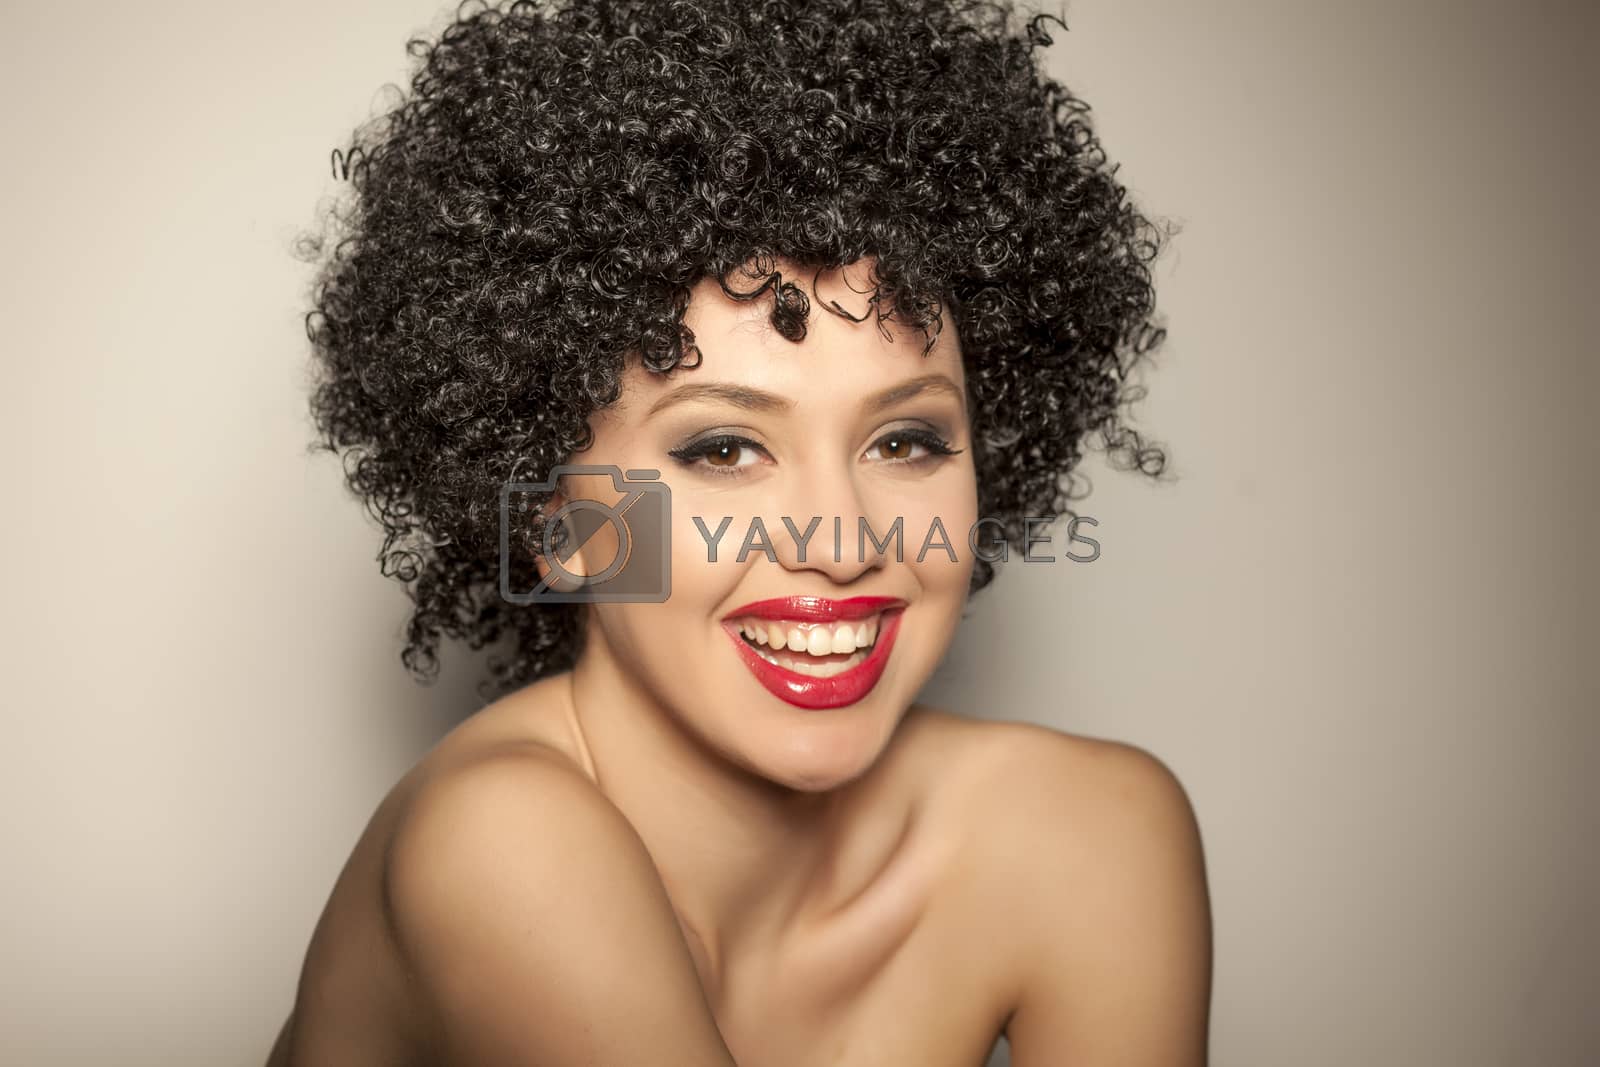 Royalty free image of woman with black curly wig by Vladimirfloyd